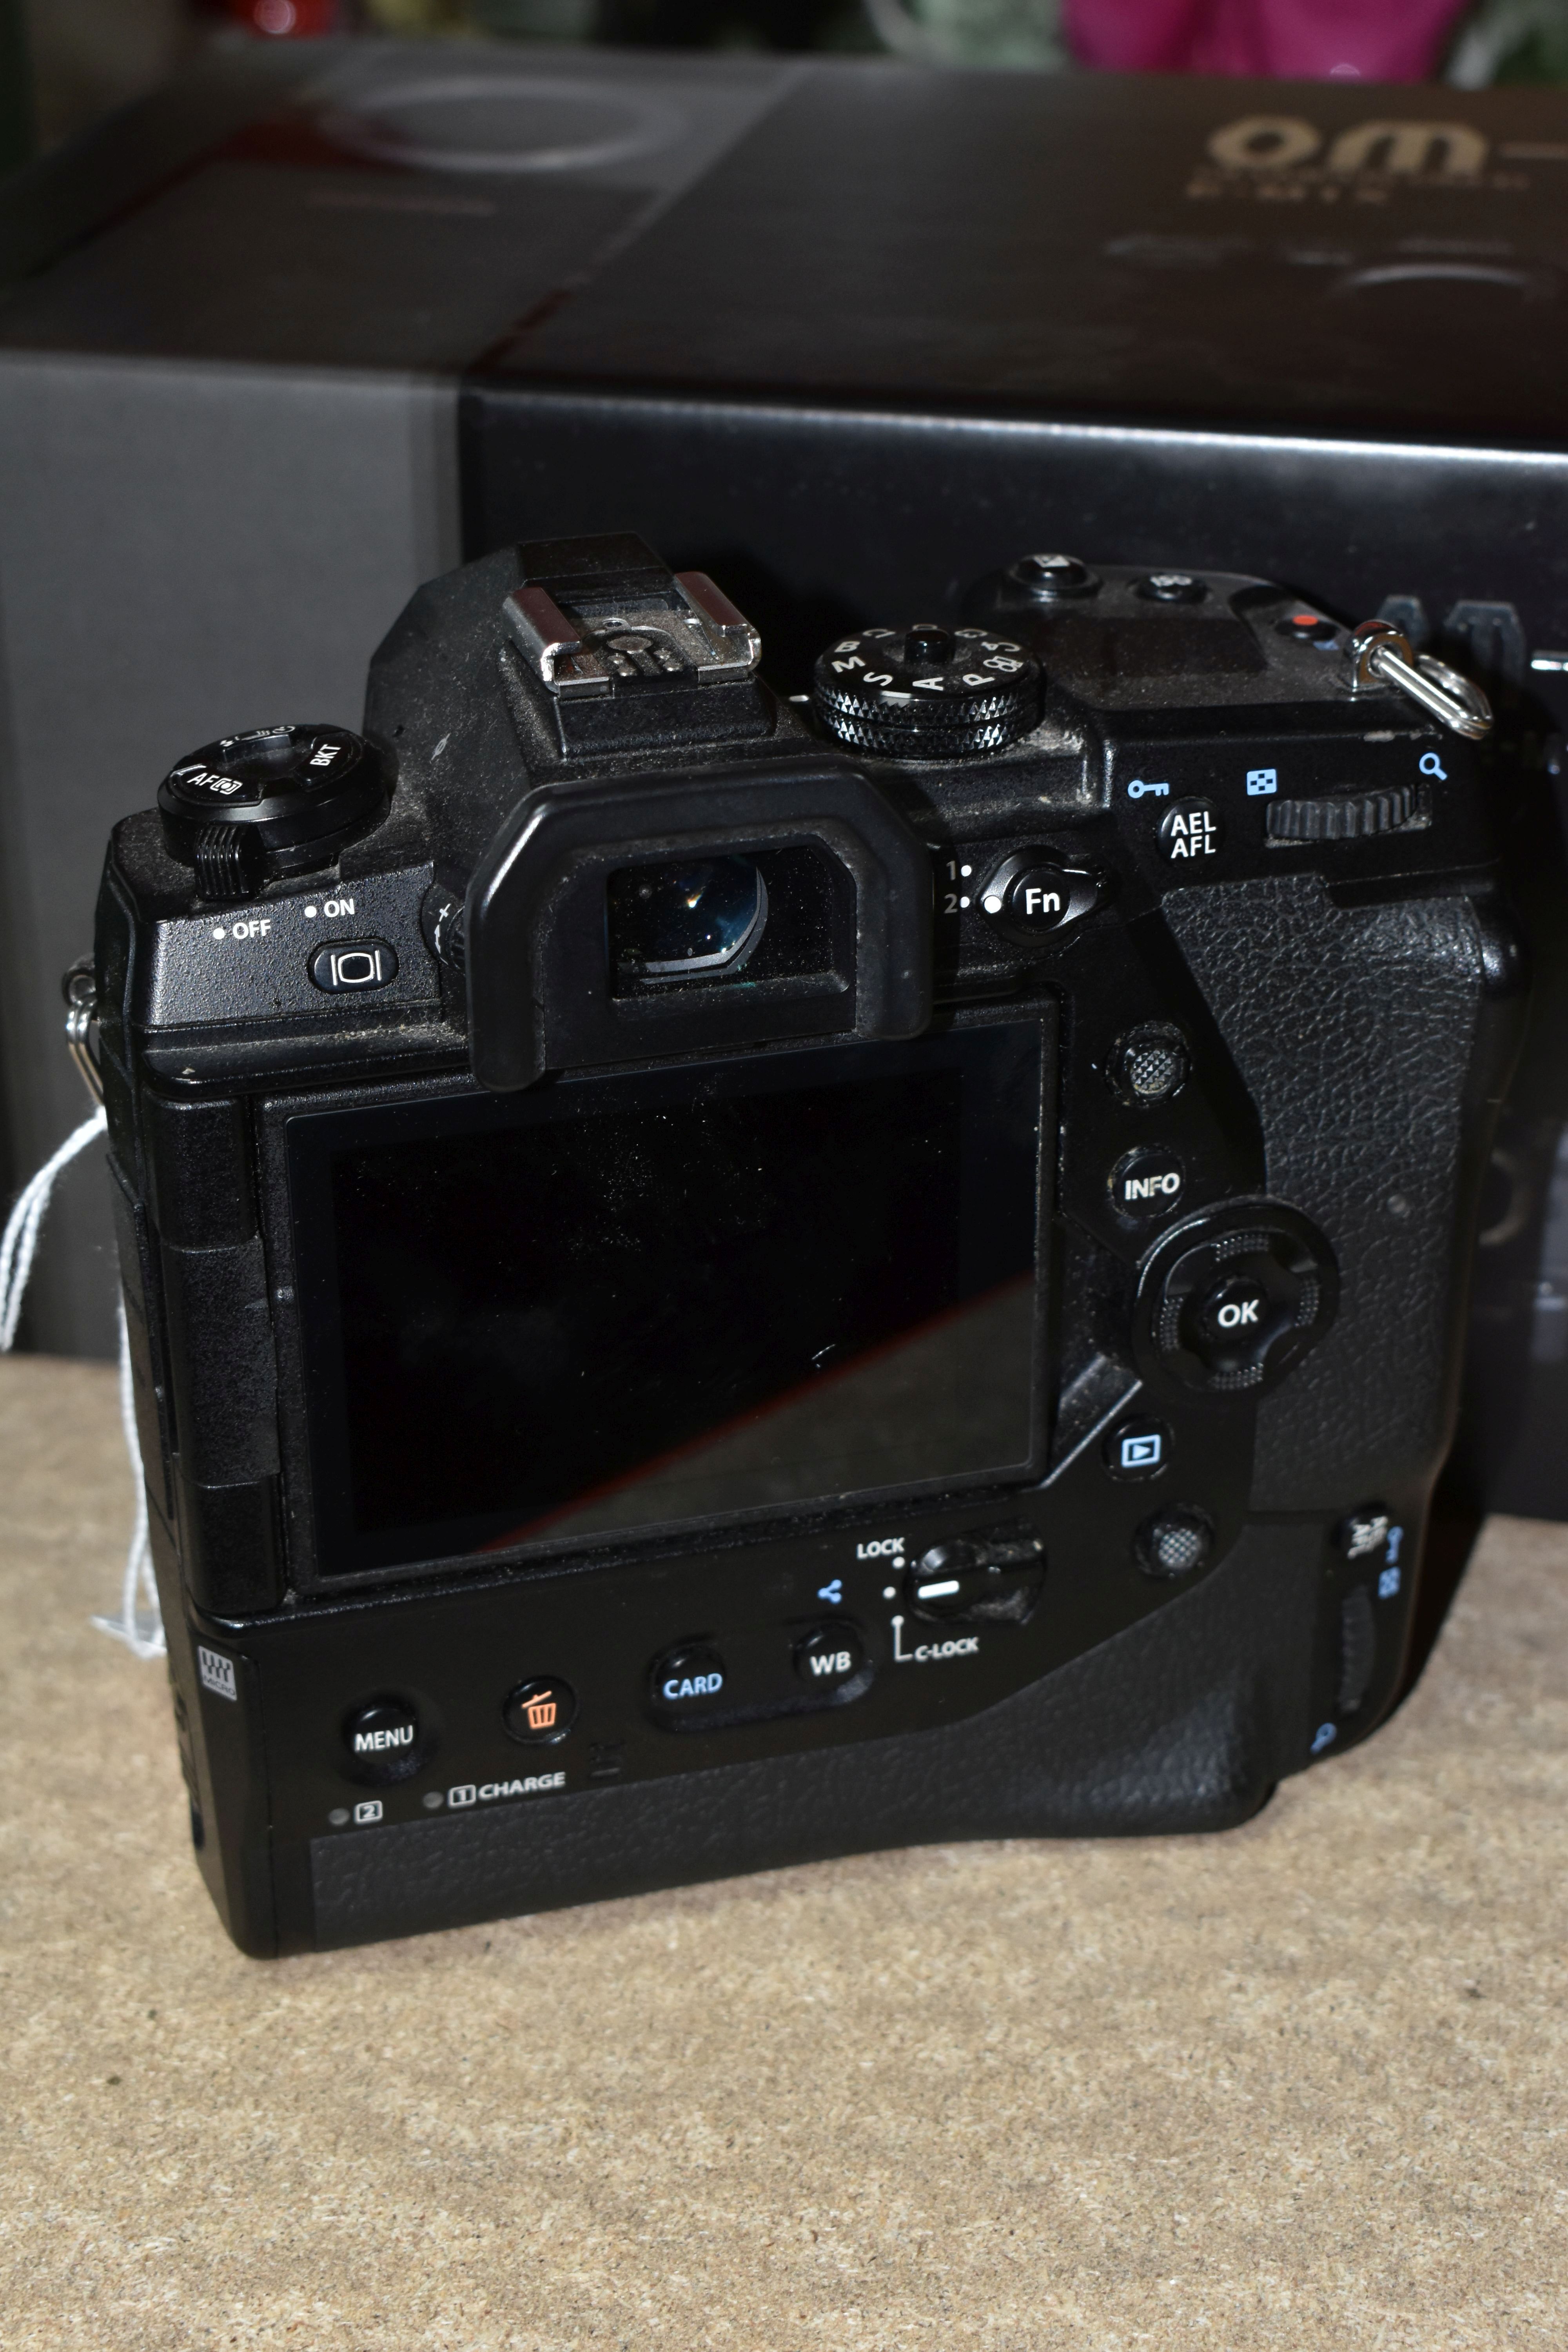 AN OLYMPUS OM-D E-M1X MIRRORLESS 4/3 CAMERA BODY, complete with battery charger (no UK power cable), - Image 2 of 4